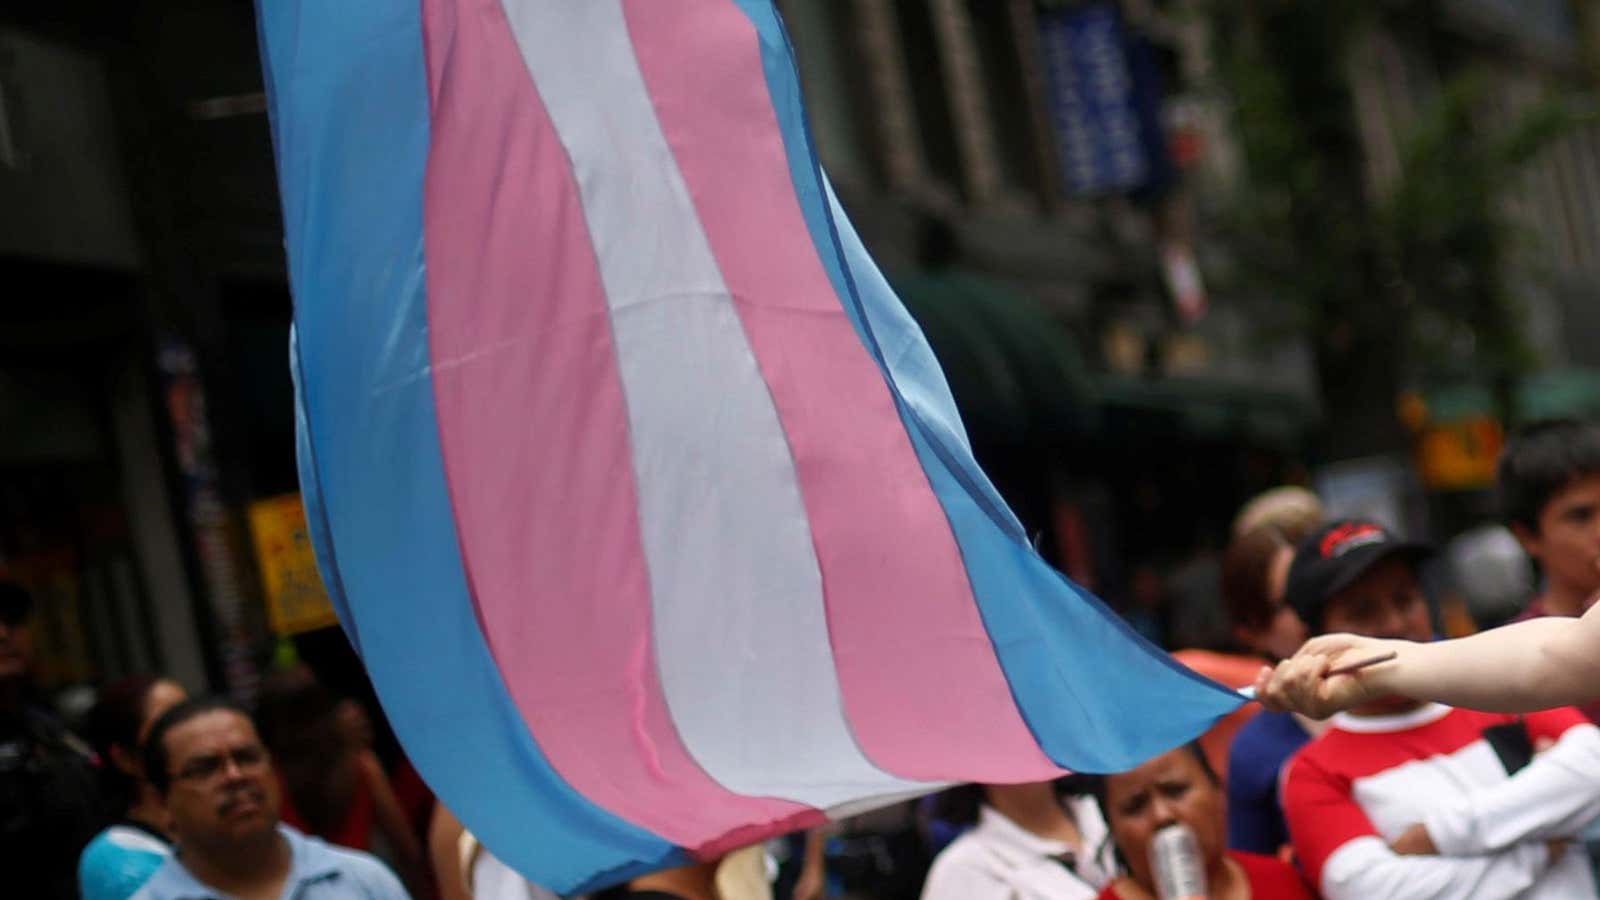 Reparations for persecuted transgender people just became law in Uruguay.